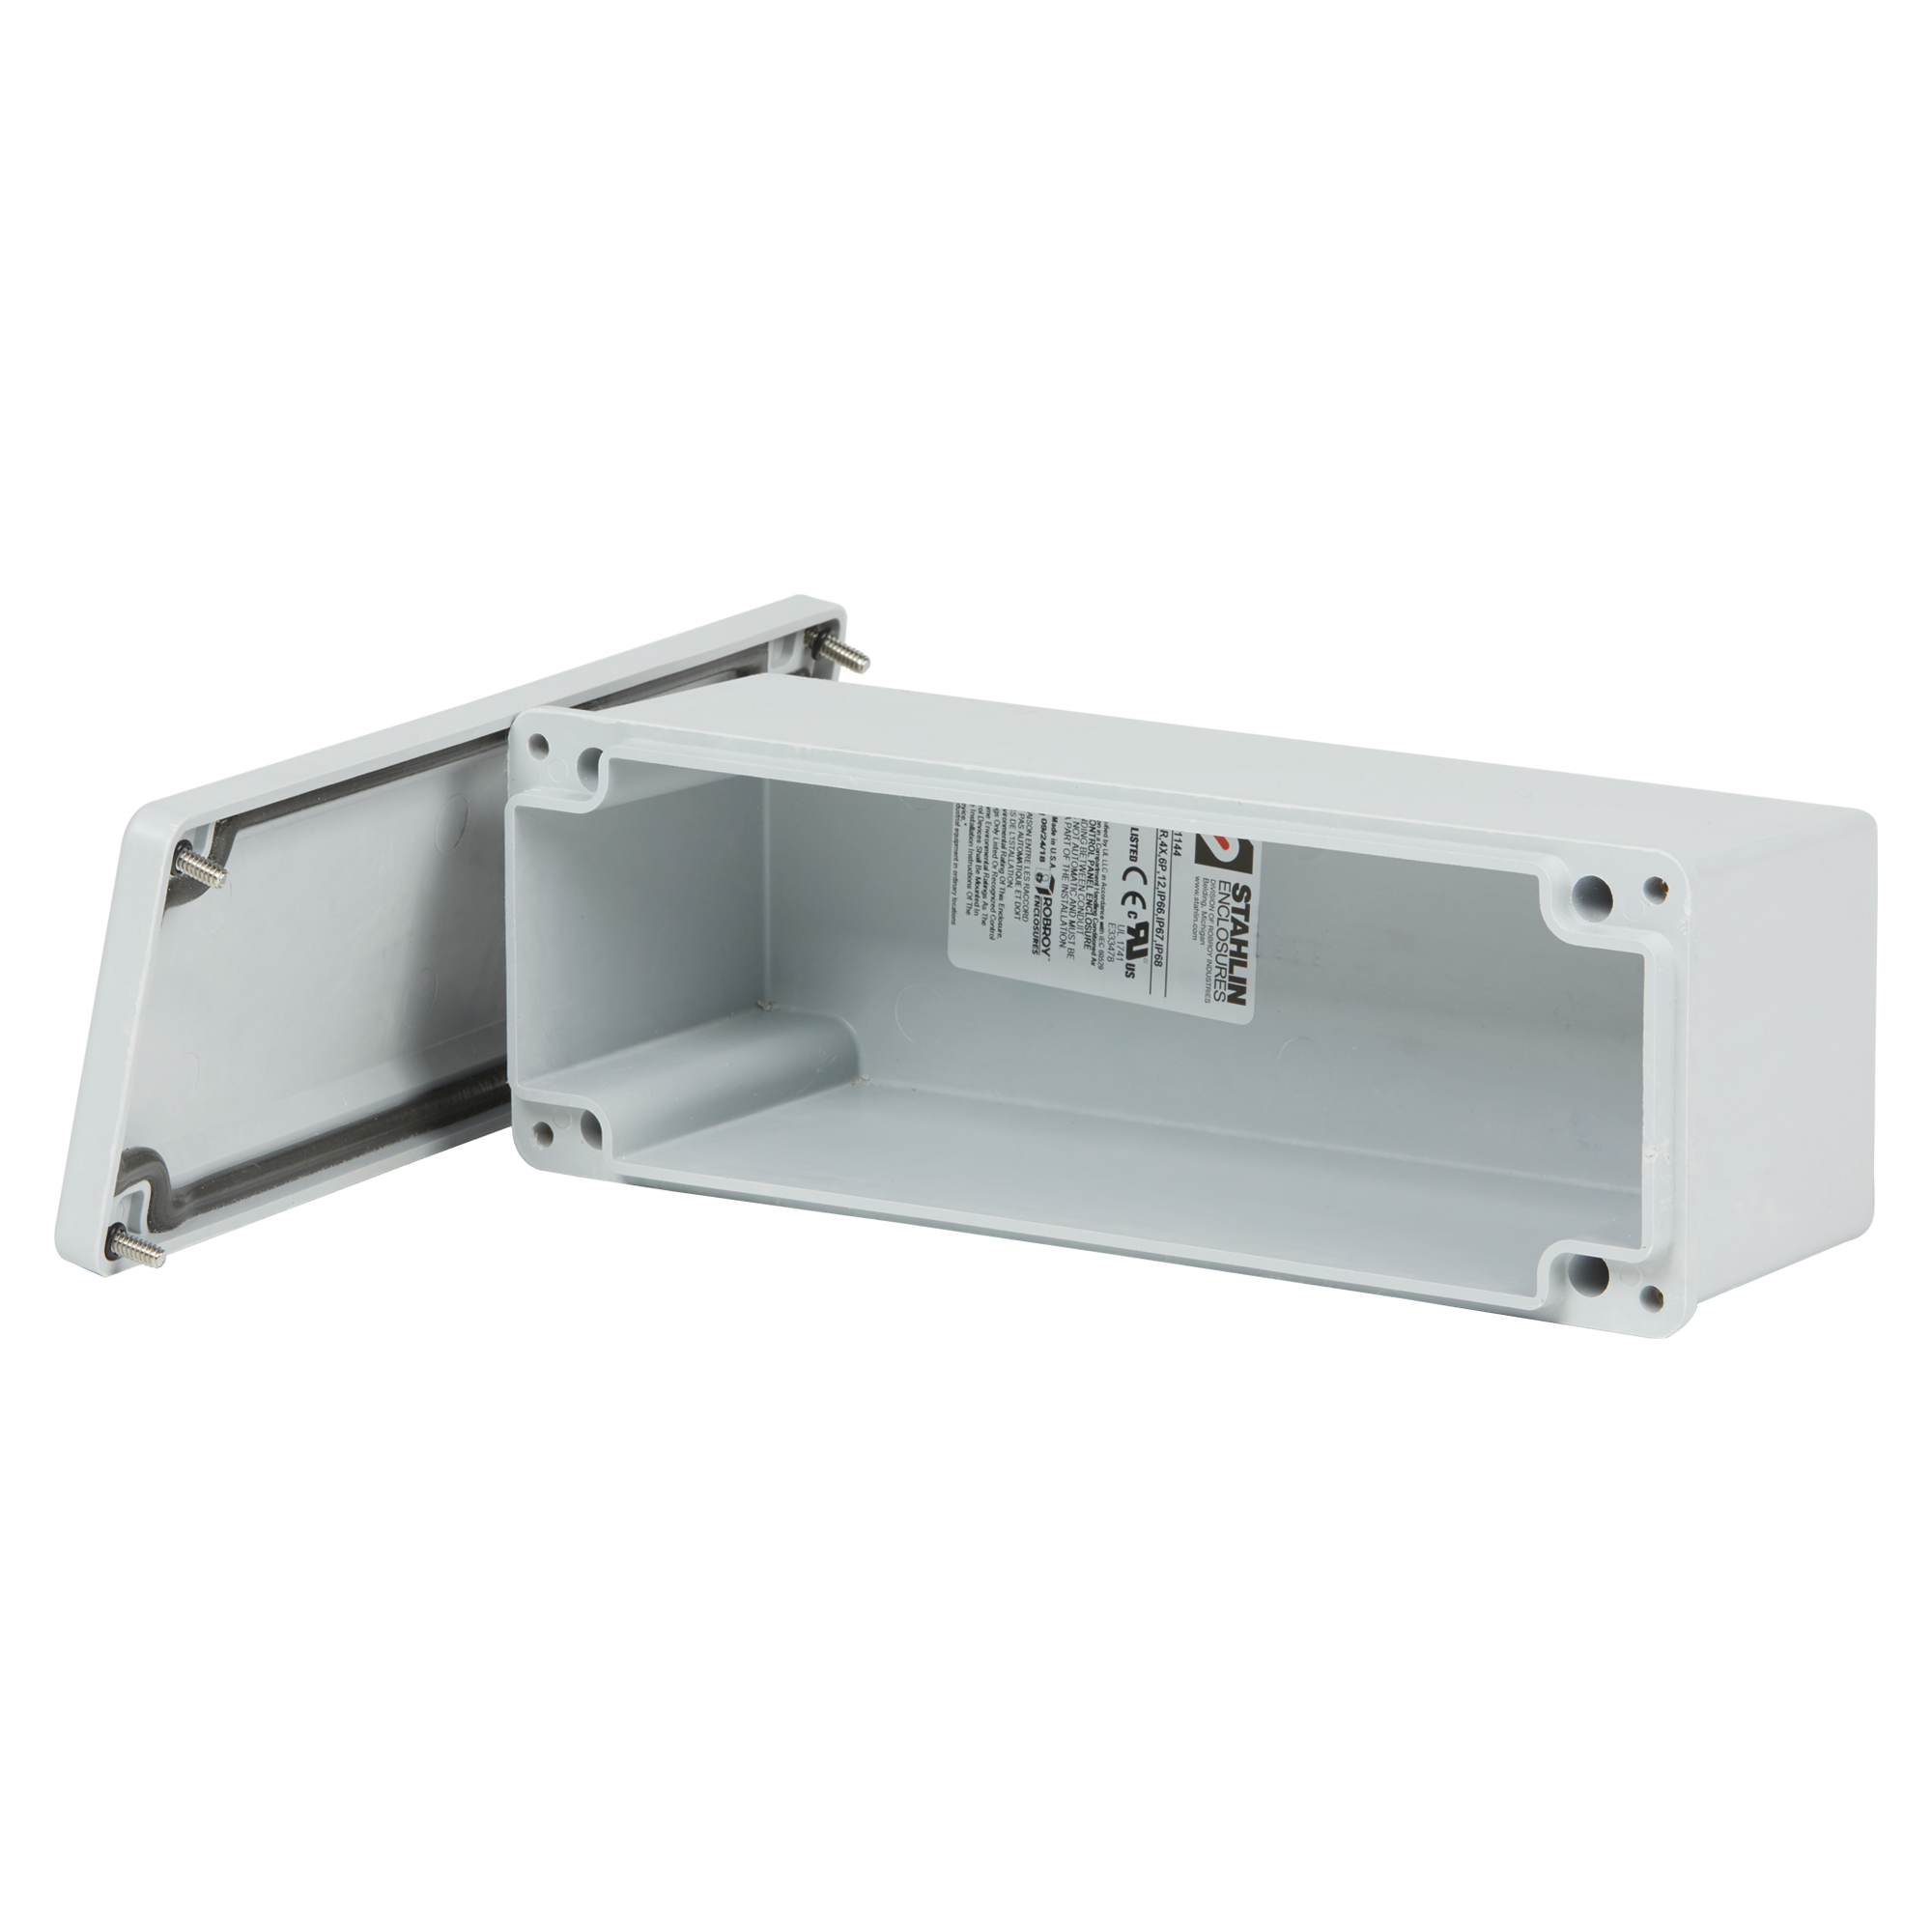 330 mm Panel 14 Gauge White 12 and 13 Enclosures 533 mm Steel Type 3R 4X 4 